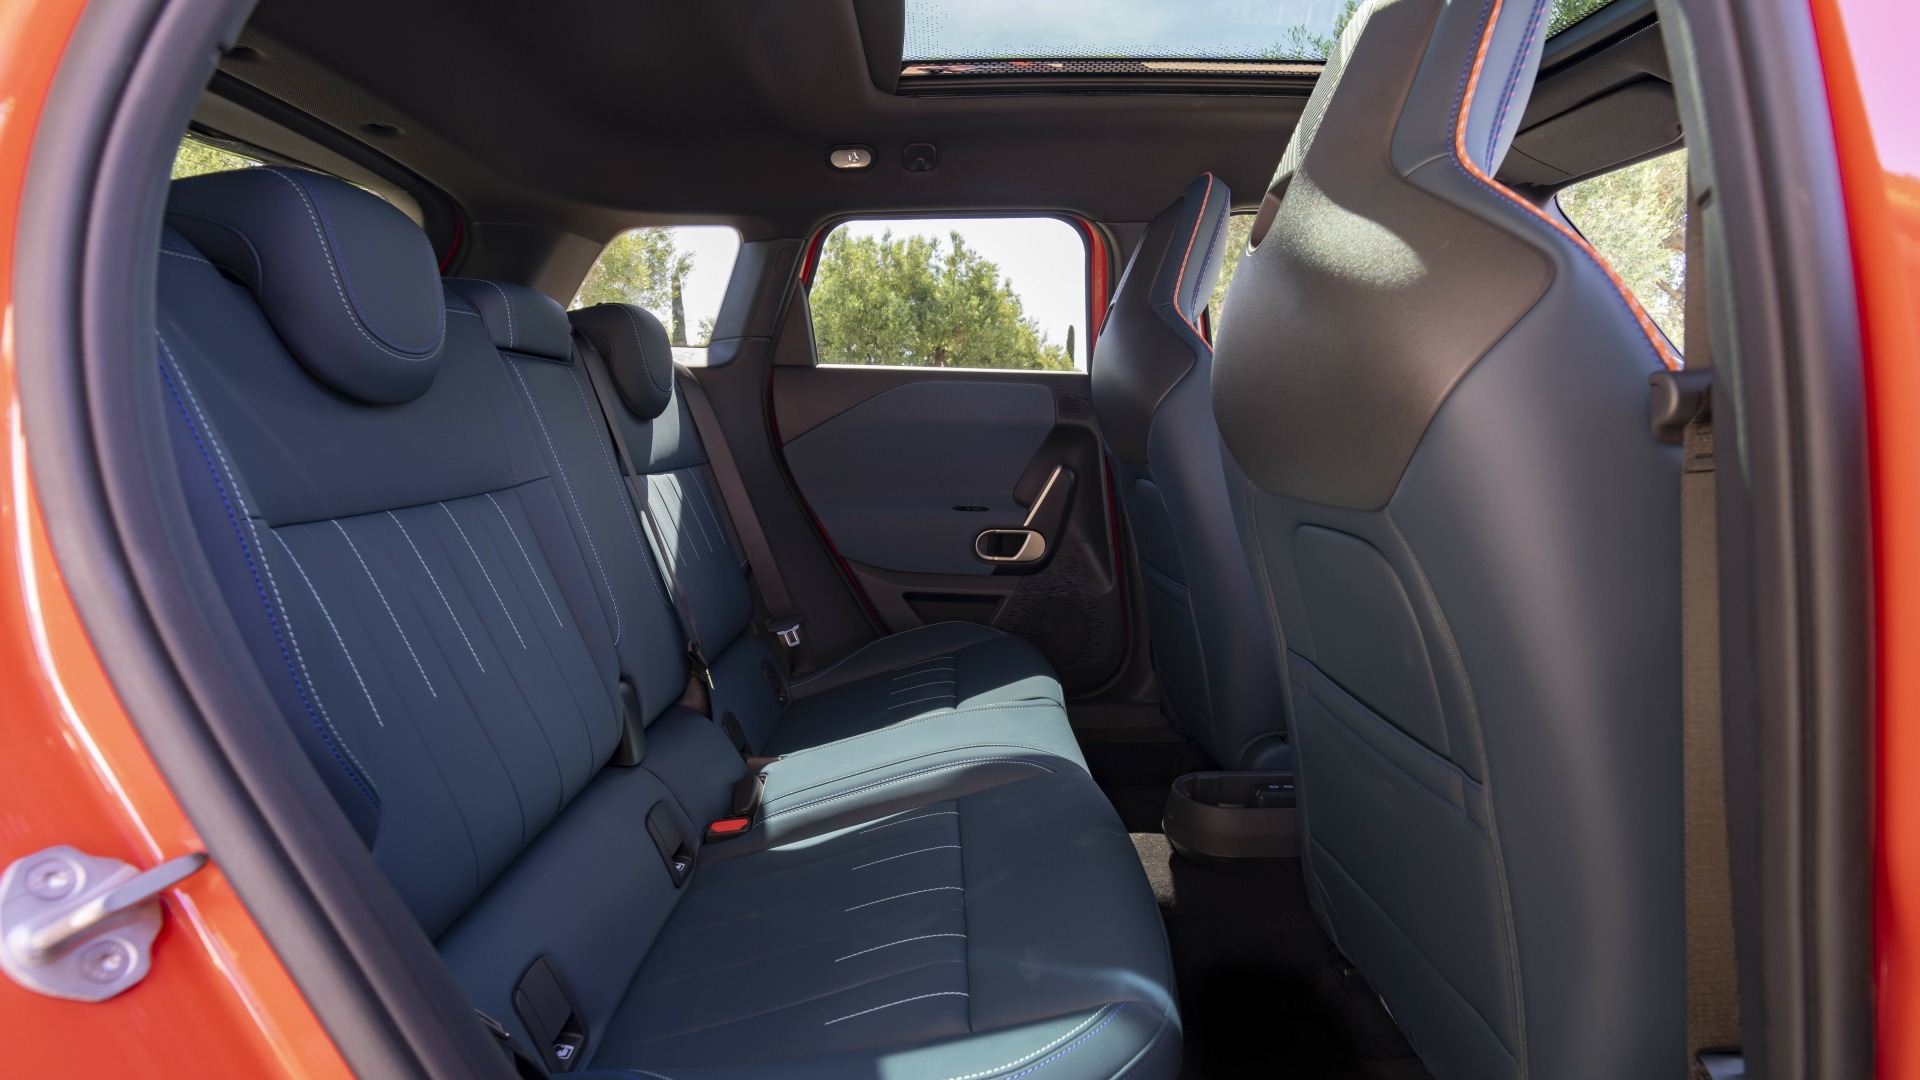 The Rear Seats Of The New Mini Aceman (Credits BMW Pressroom)